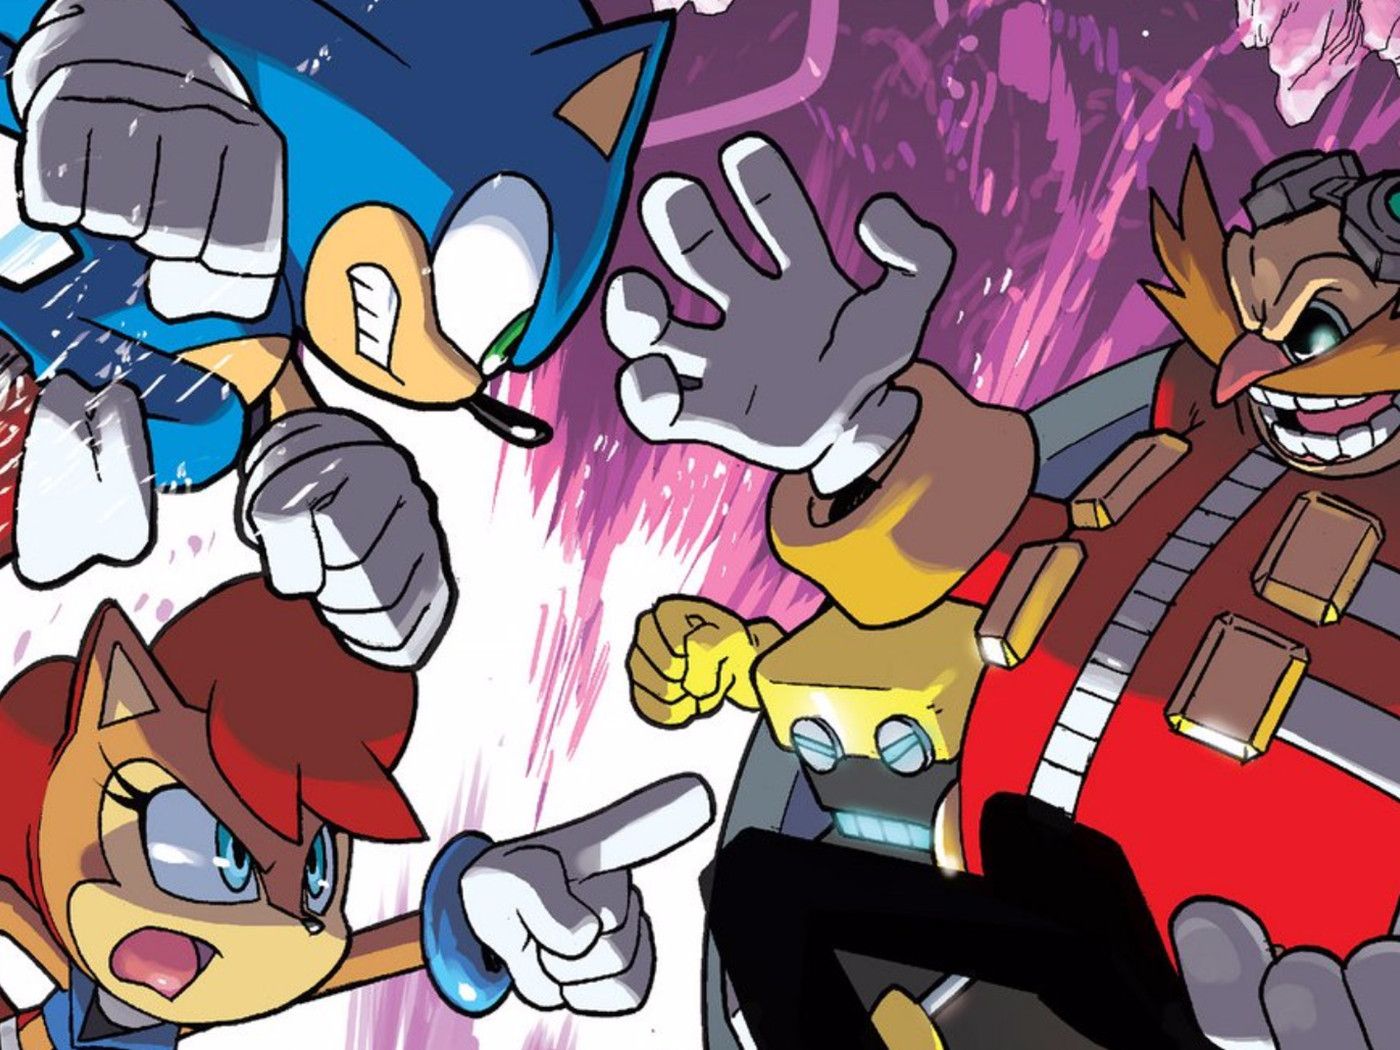 How Did Sonic The Hedgehog Become America's Longest Running Comic?